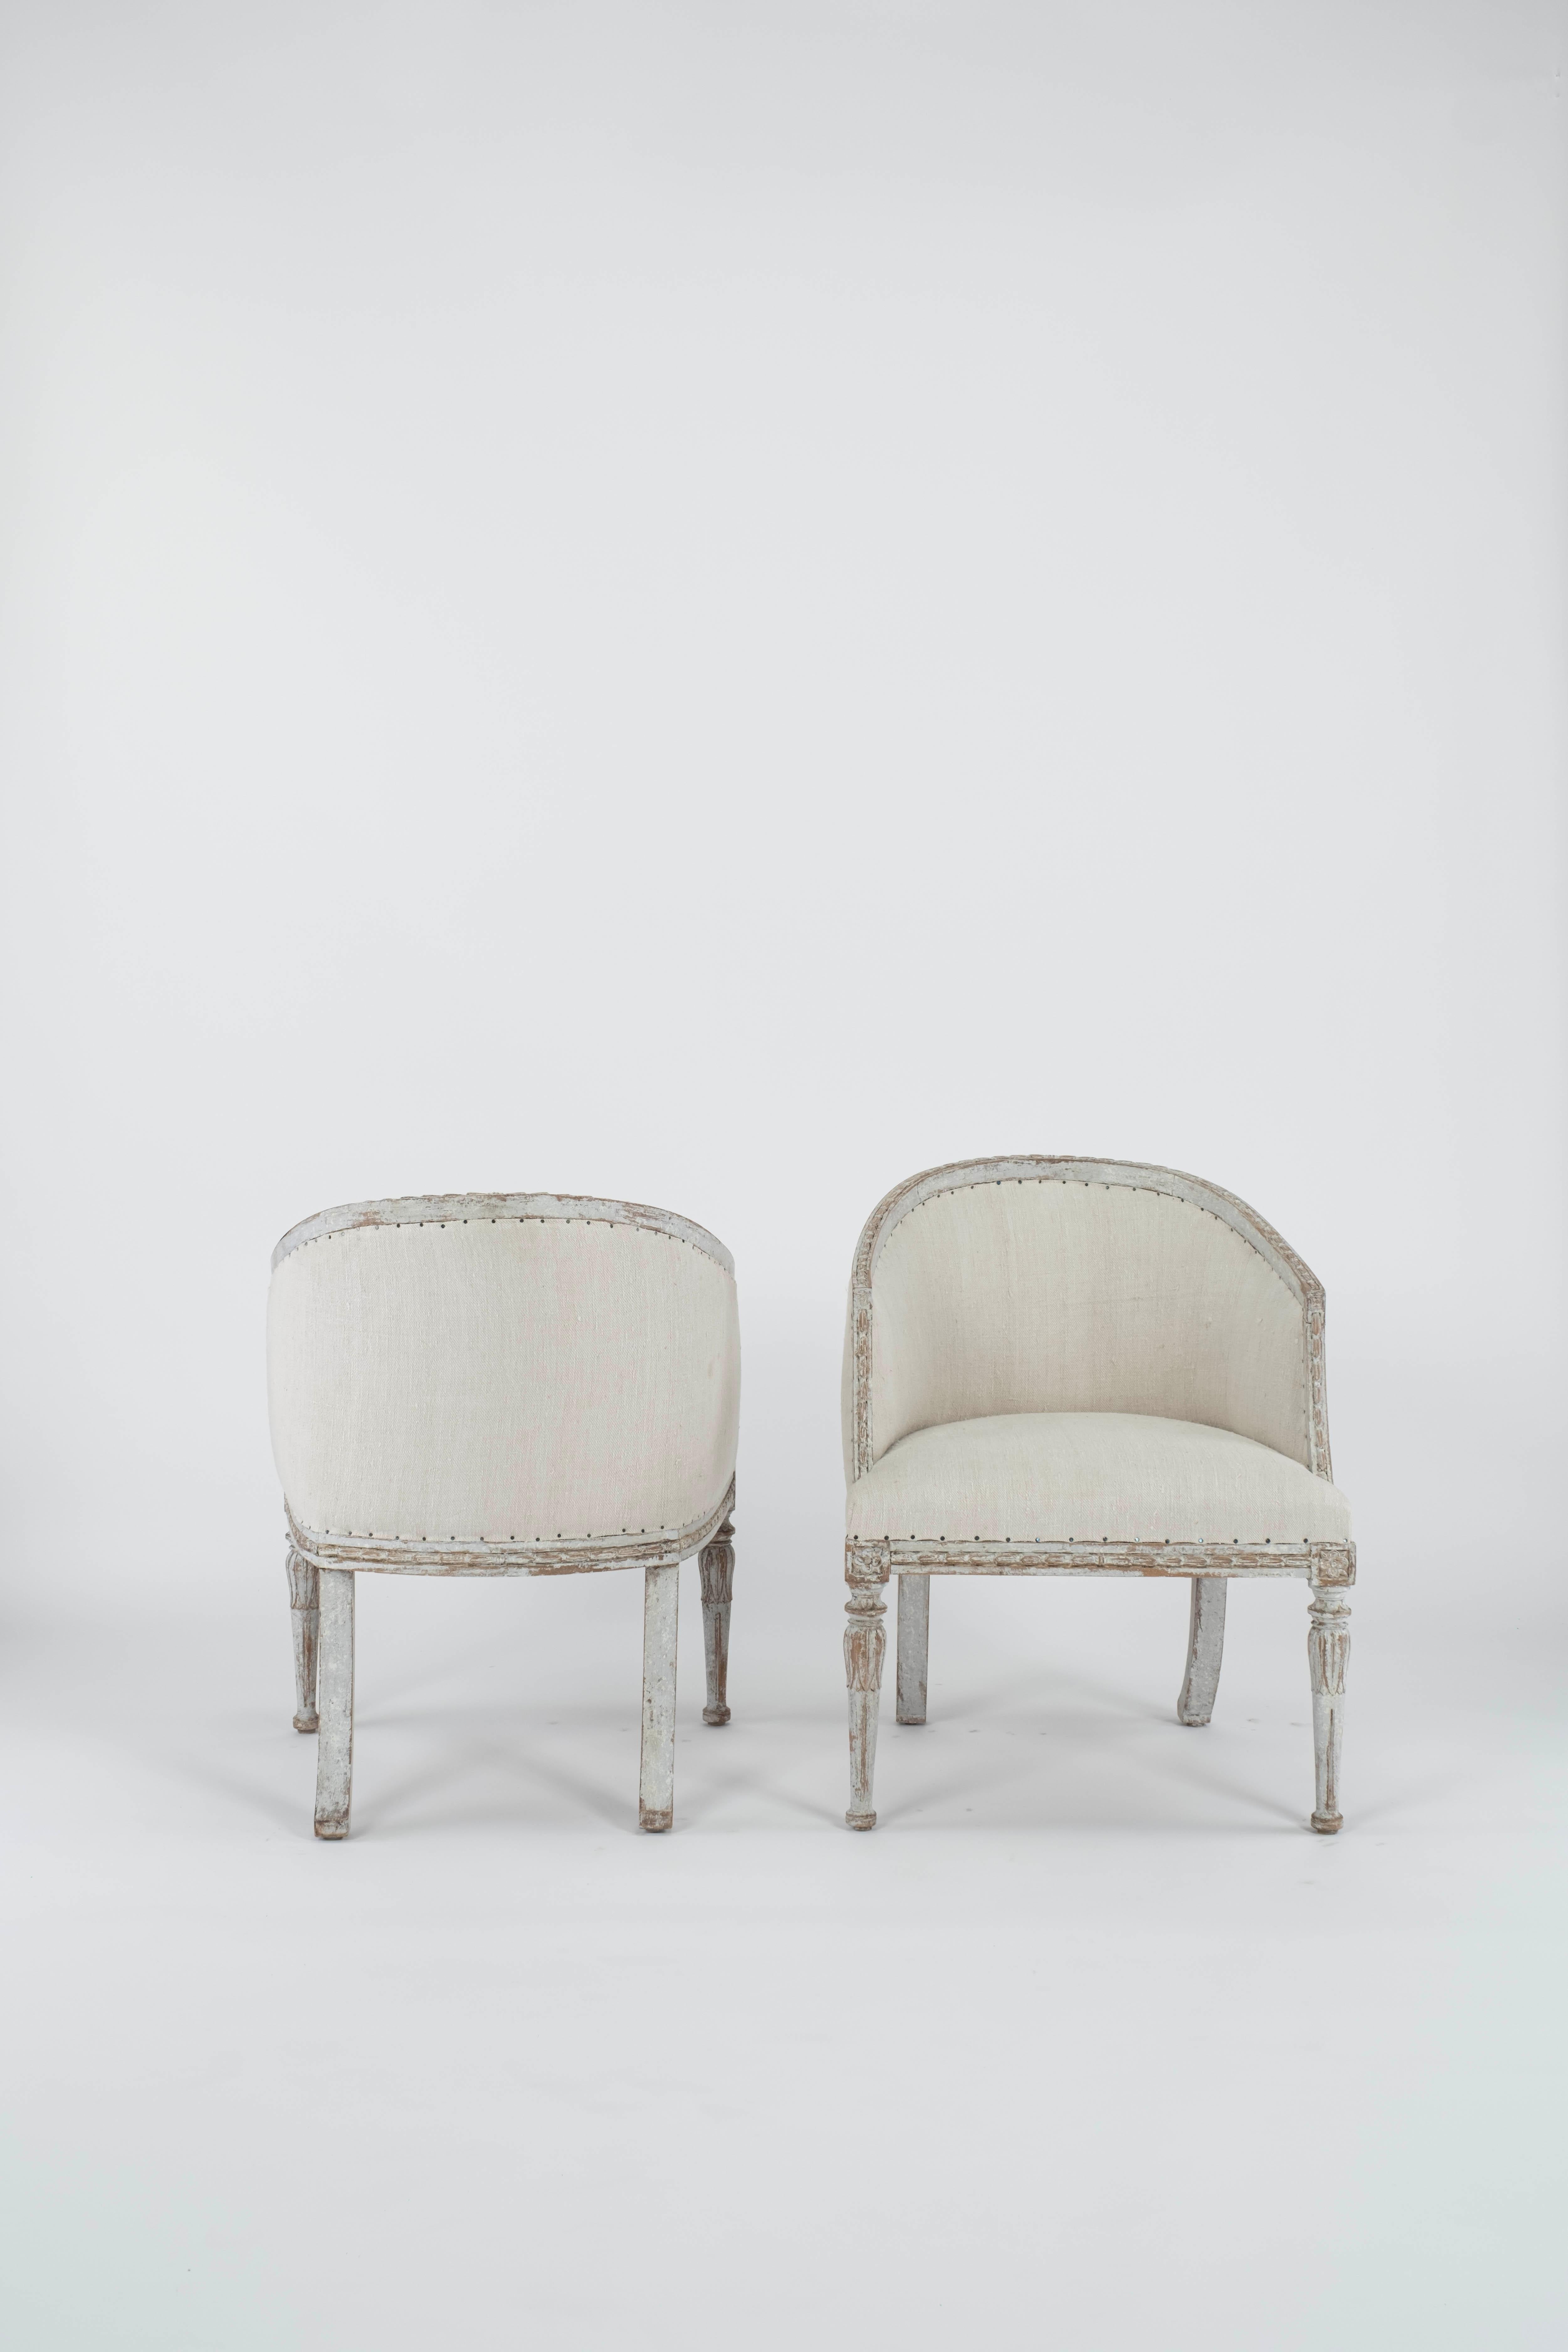 Pine Pair of Swedish Gustavian Chairs For Sale